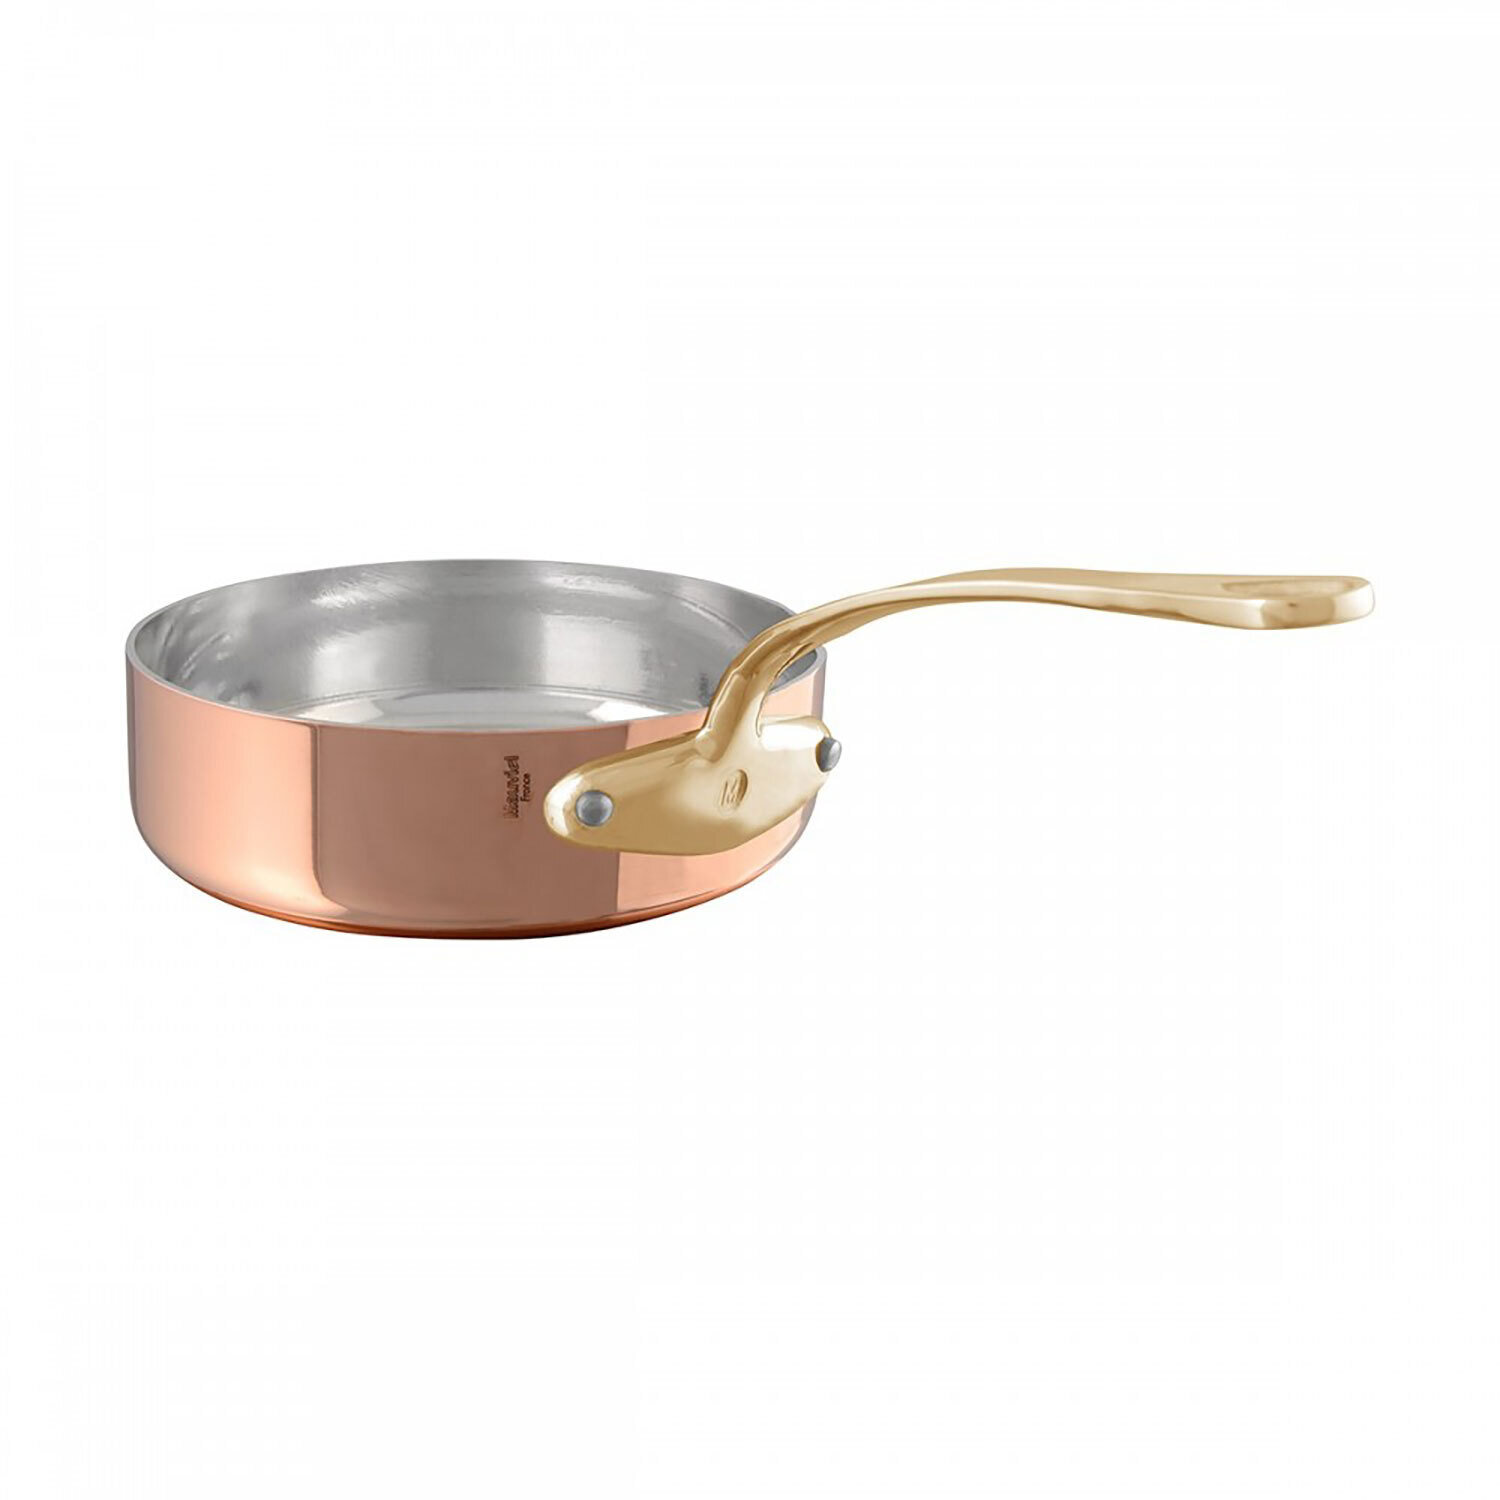 Mauviel M'Tradition Copper Splayed Saute Pan withbronze Handles And Tin Inside 18cm 284520